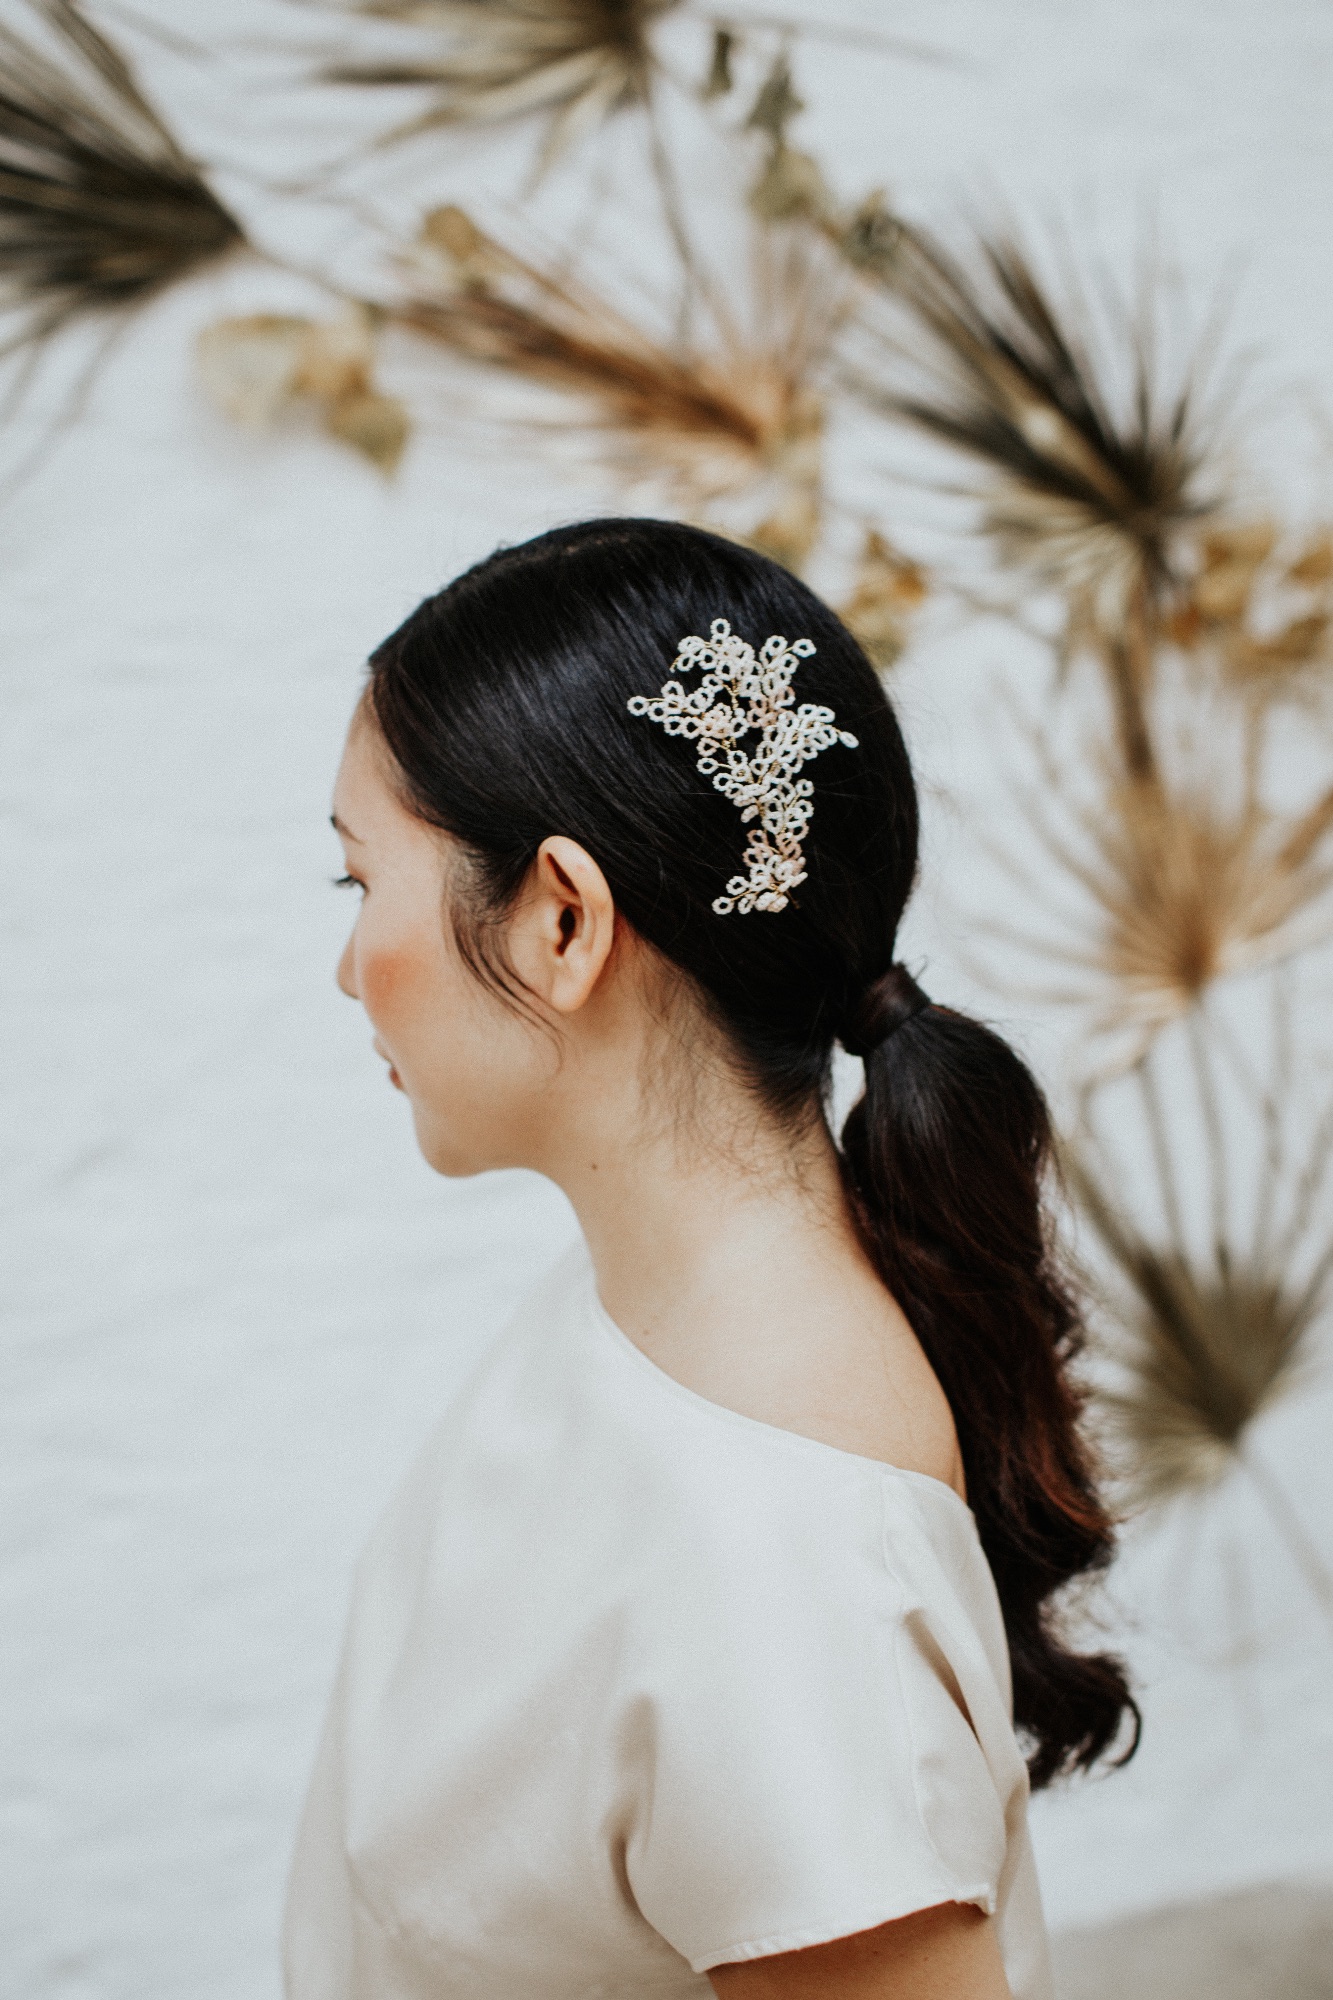 Willow delicate blossom wedding hair pins worn with a low ponytail